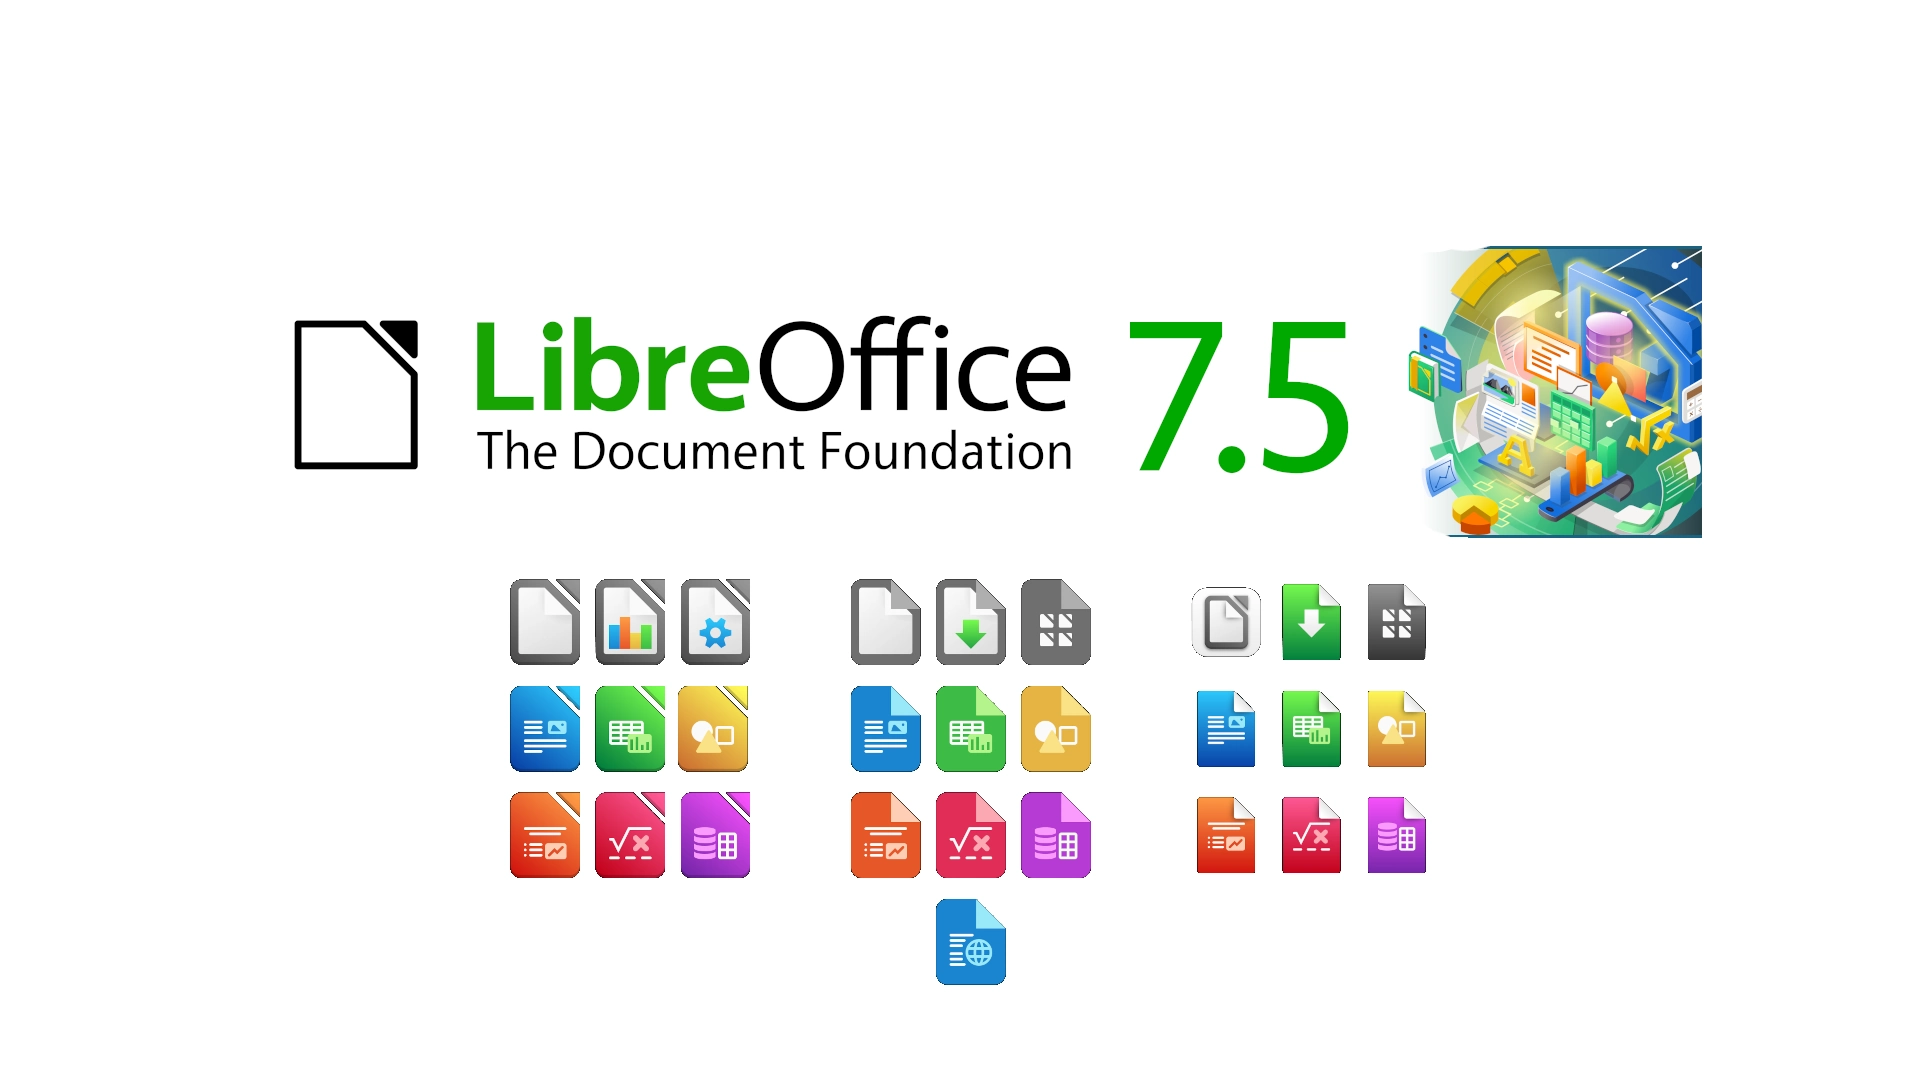 LibreOffice 7.5.8 Is Here as the Last Update in the Series, Upgrade to LibreOffice 7.6 Now